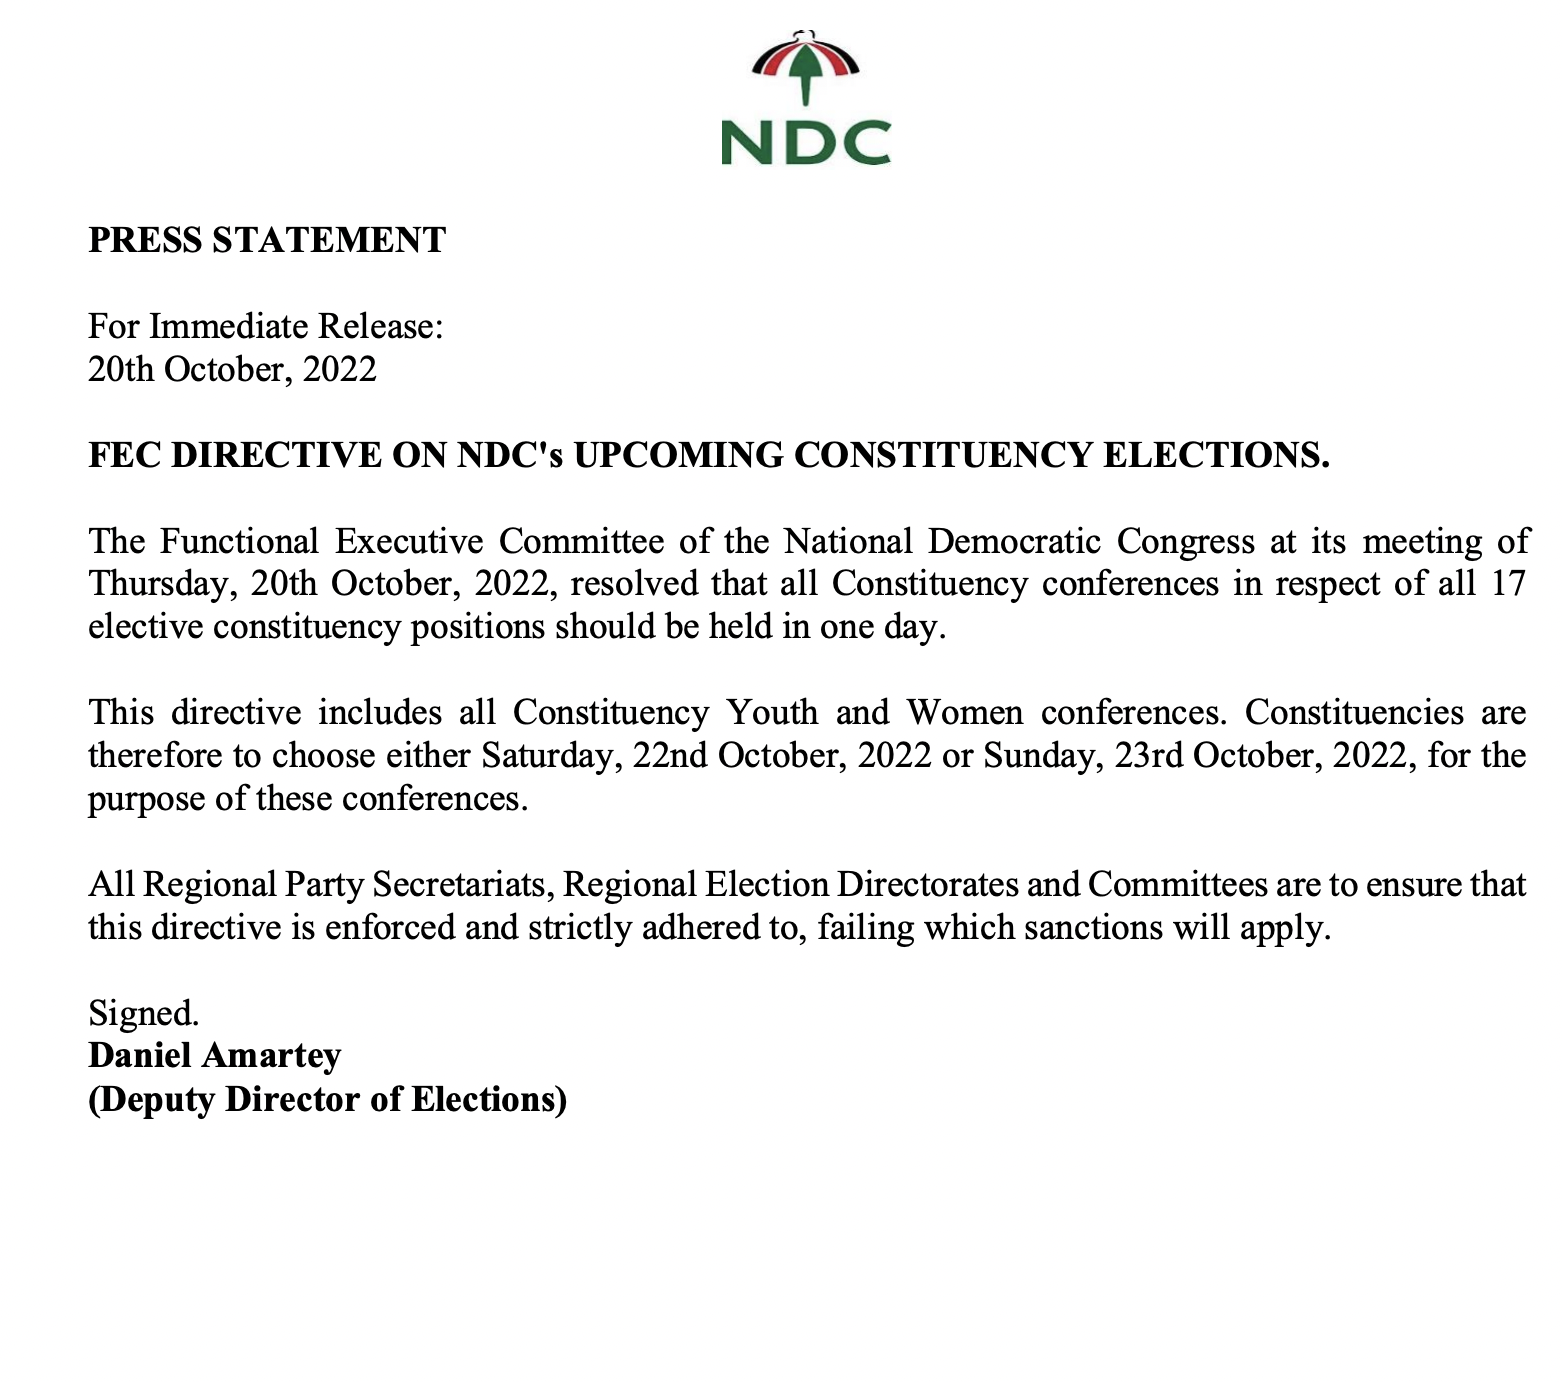 FEC issues directives on constituency elections of the NDC